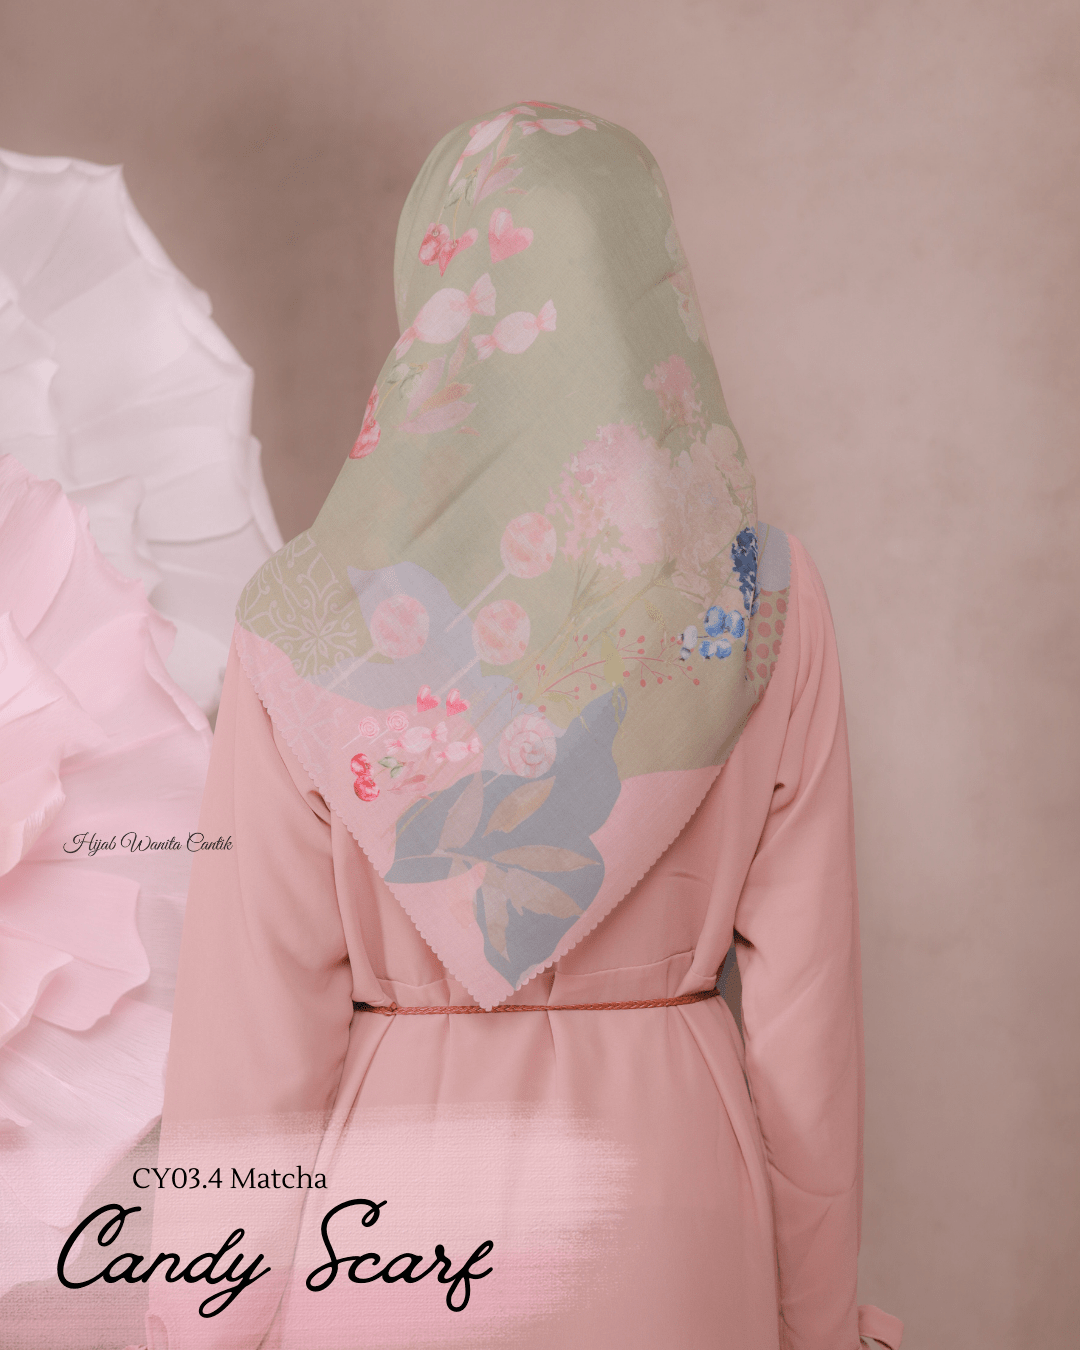 Candy Scarf Icy Voal - CY03.4 Matcha